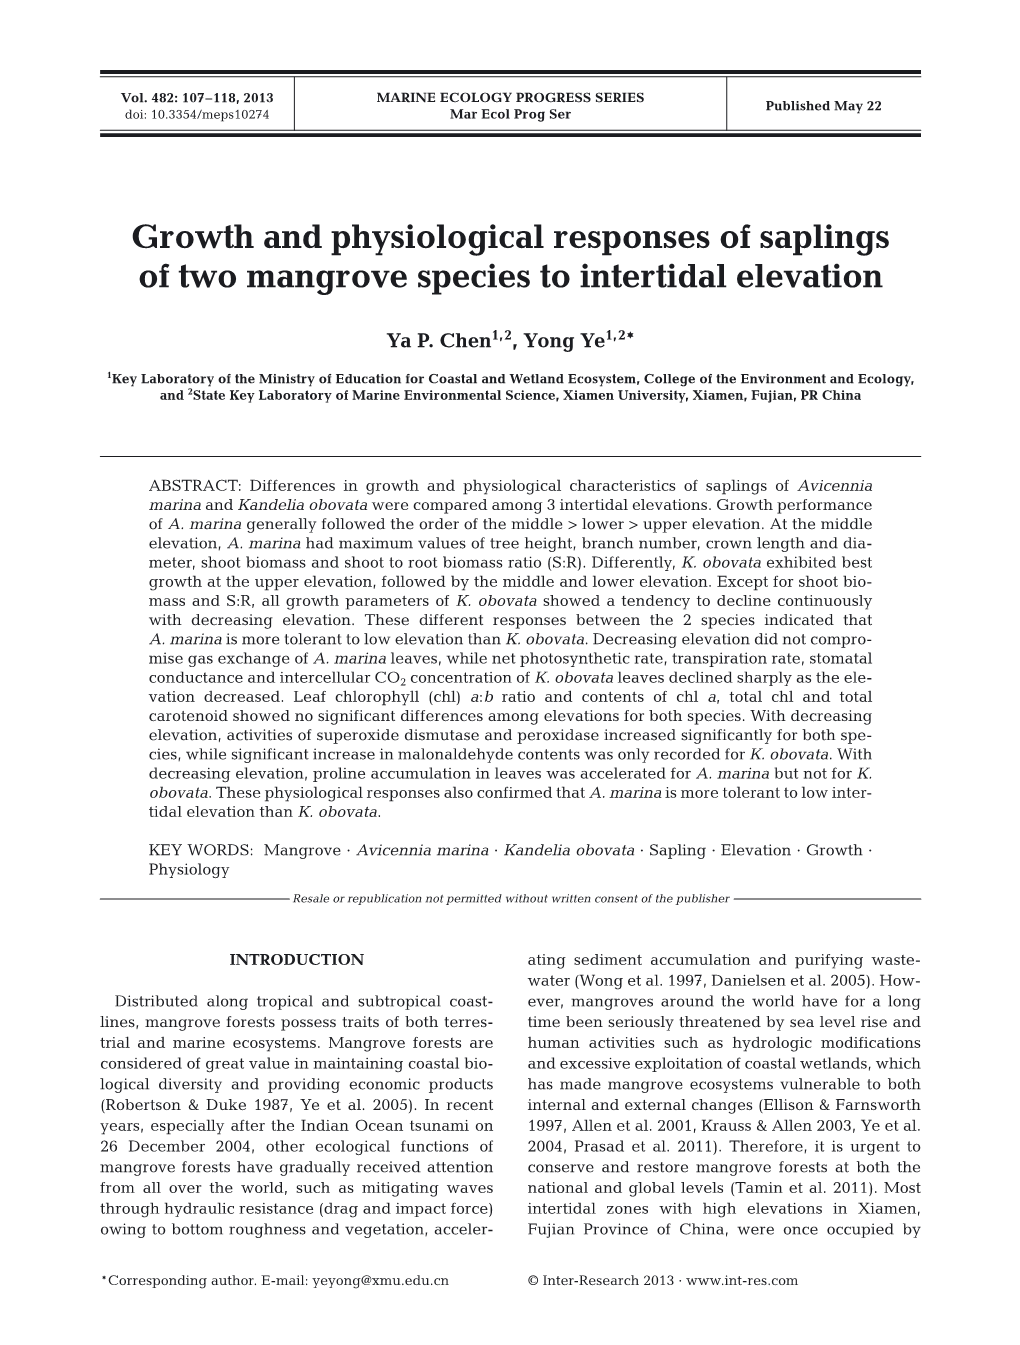 Growth and Physiological Responses of Saplings of Two Mangrove Species to Intertidal Elevation